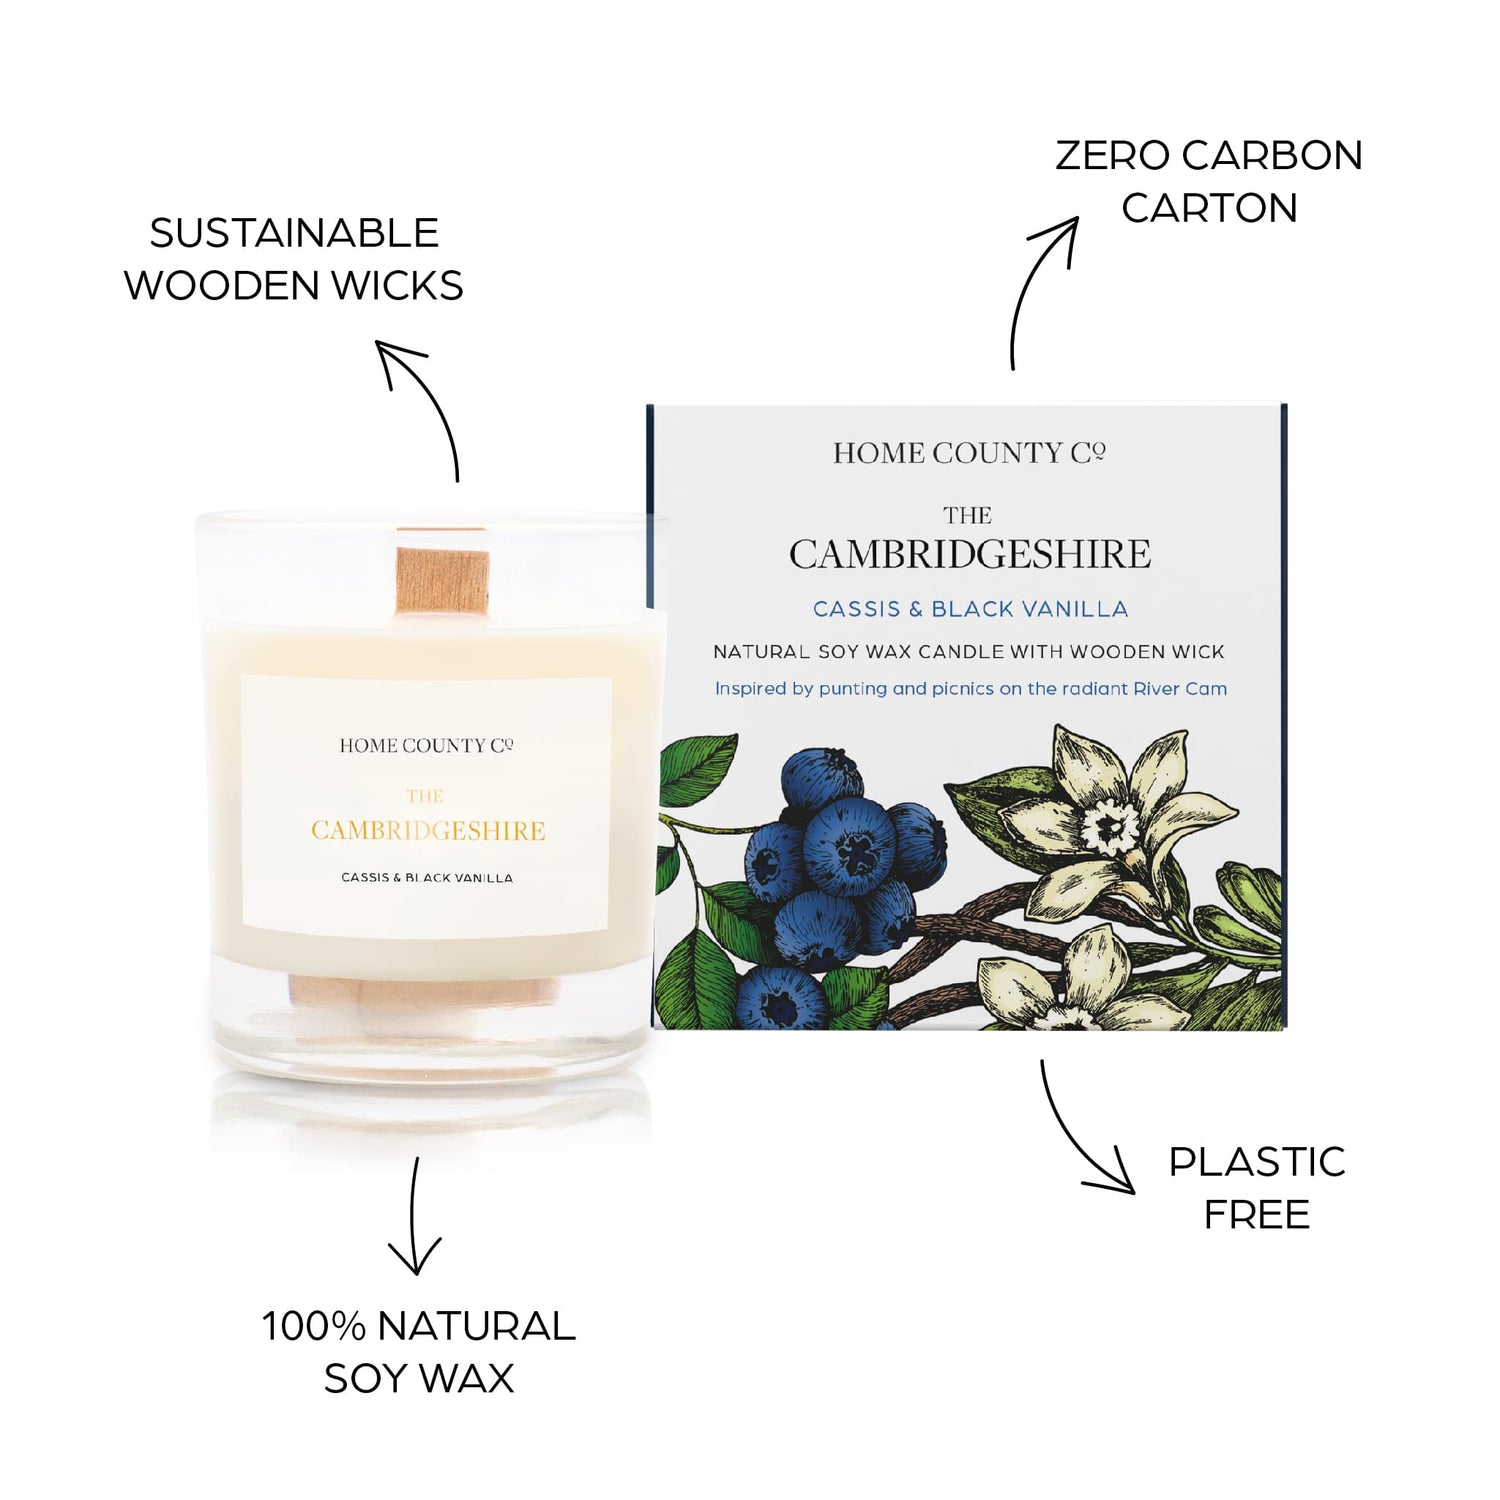 Sustainable candle credentials are shown around the vanilla scented candle image - sustainable wooden wicks, zero carbon carton, 100% natural soy wax, plastic free